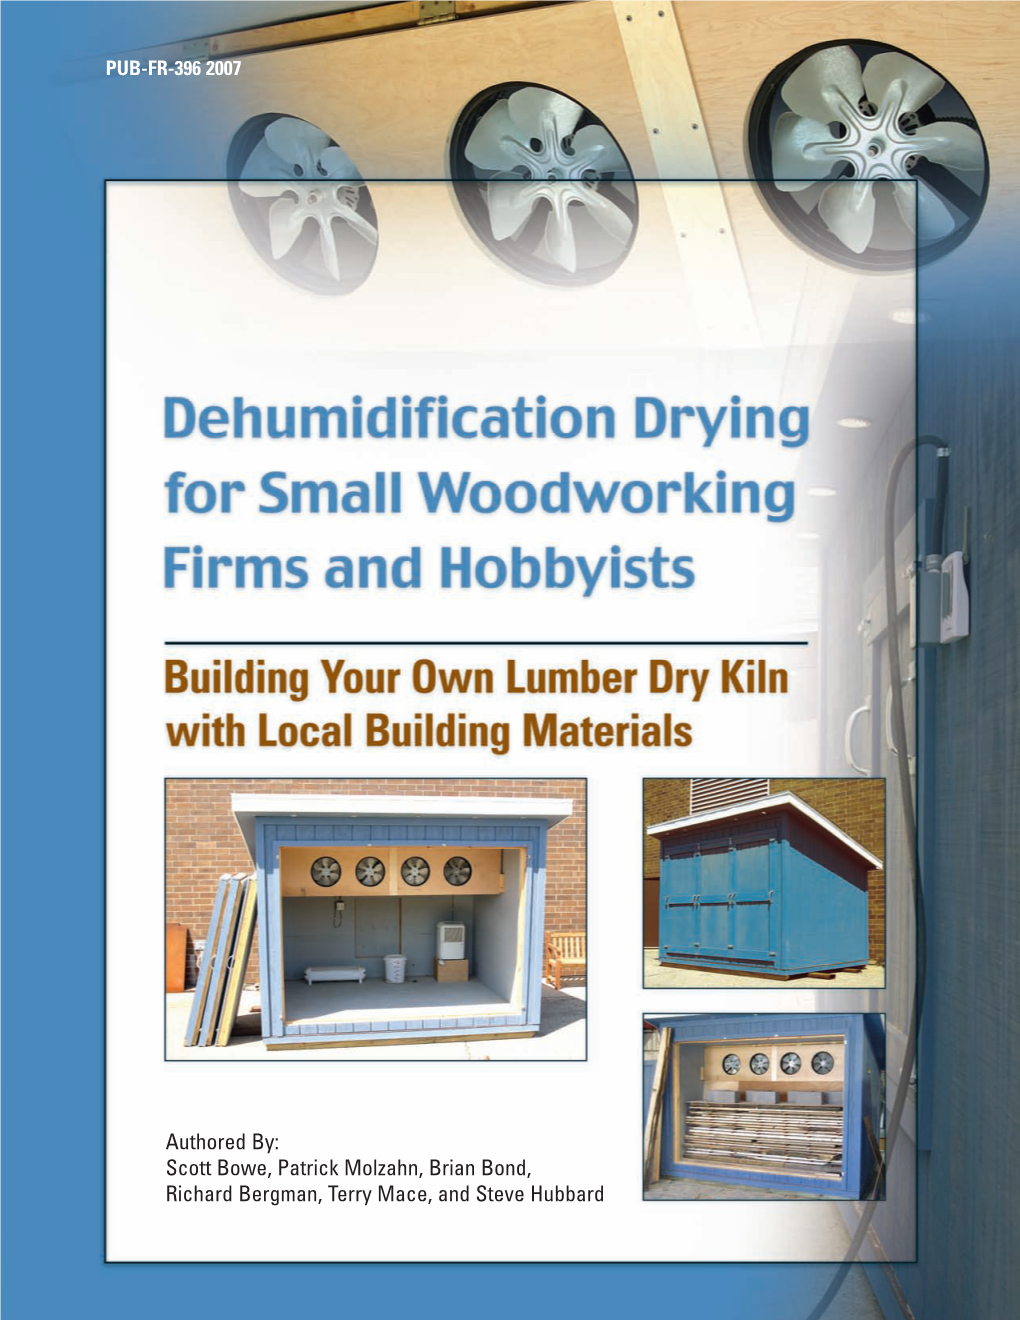 Dehumidifiation Drying for Small Woodworking Firms and Hobbyists